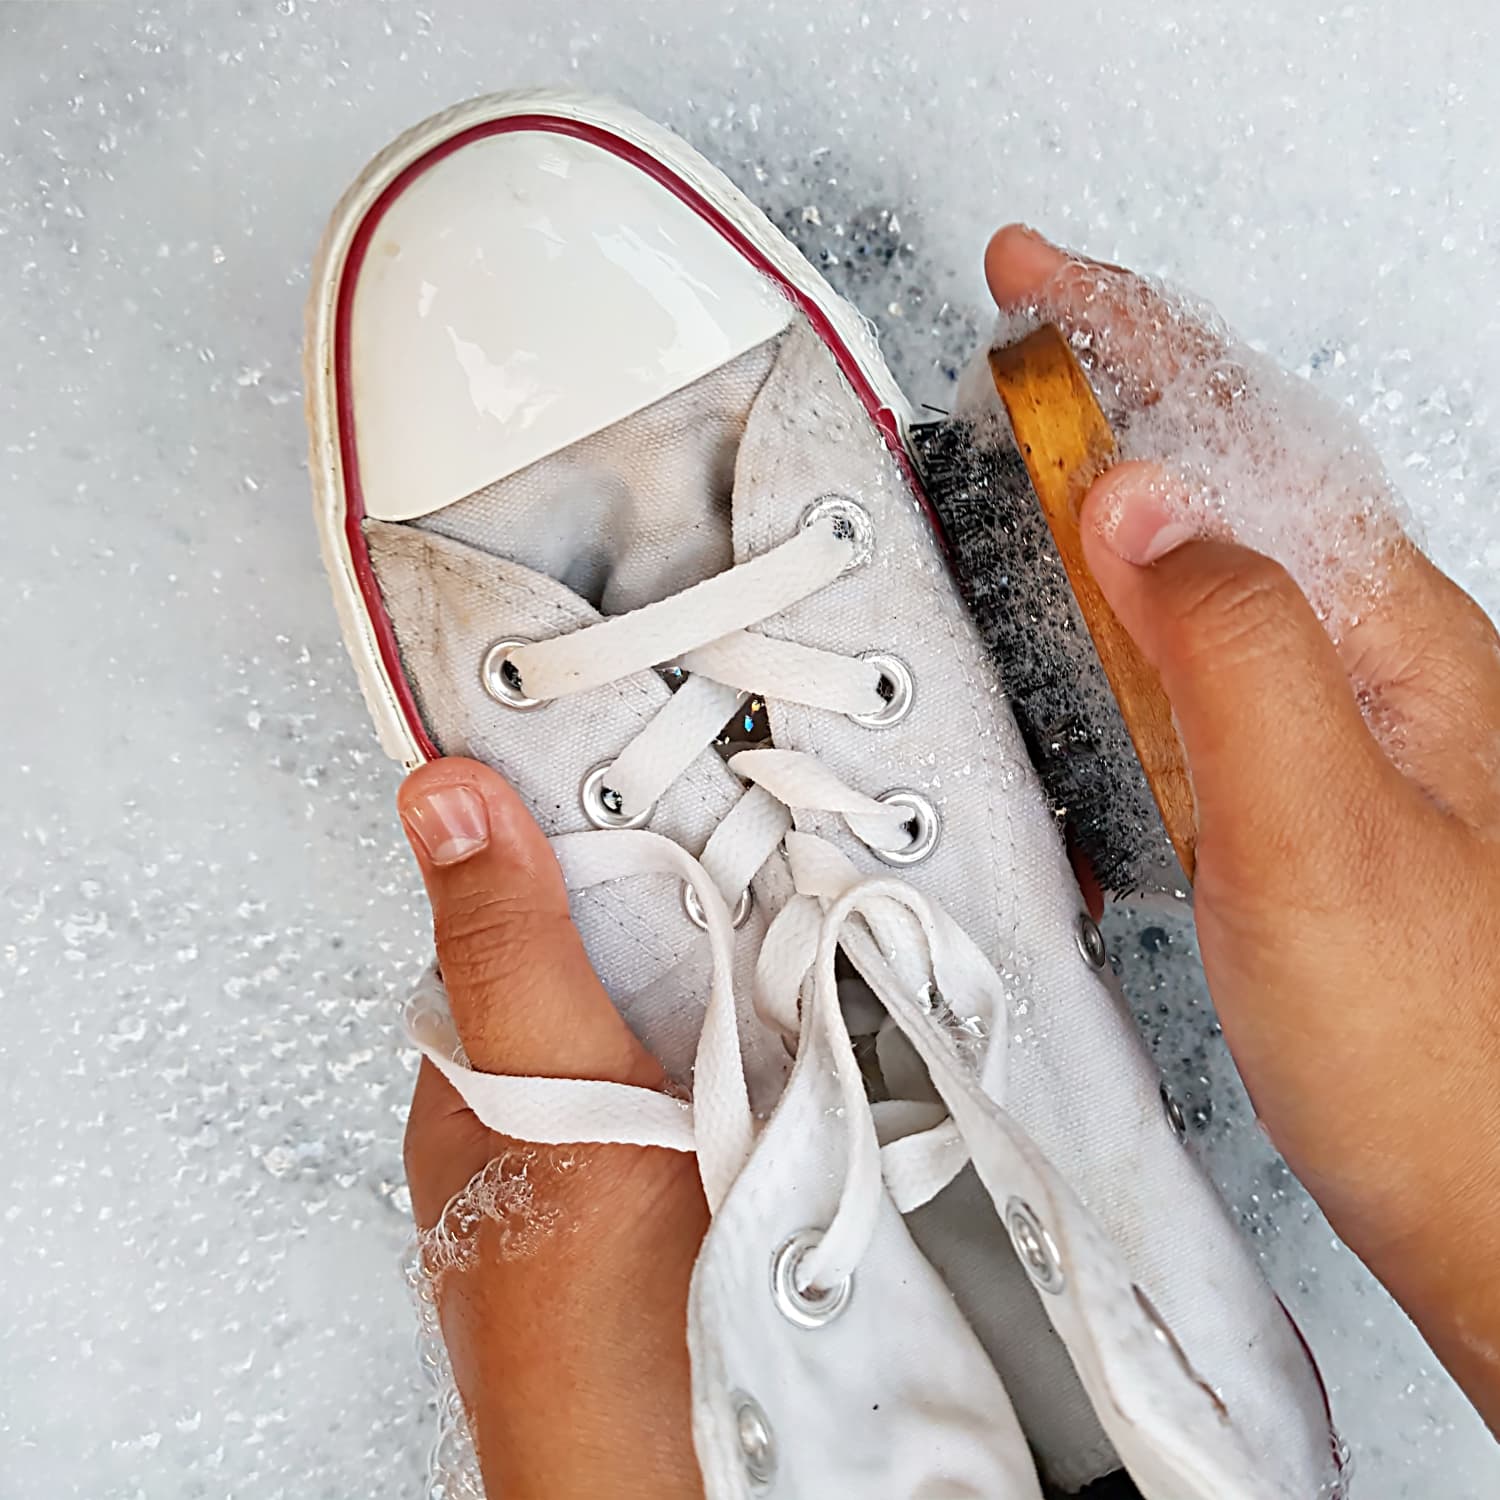 White Sneaker Cleaner Easy Using Fabric Cleaner Effective Remove